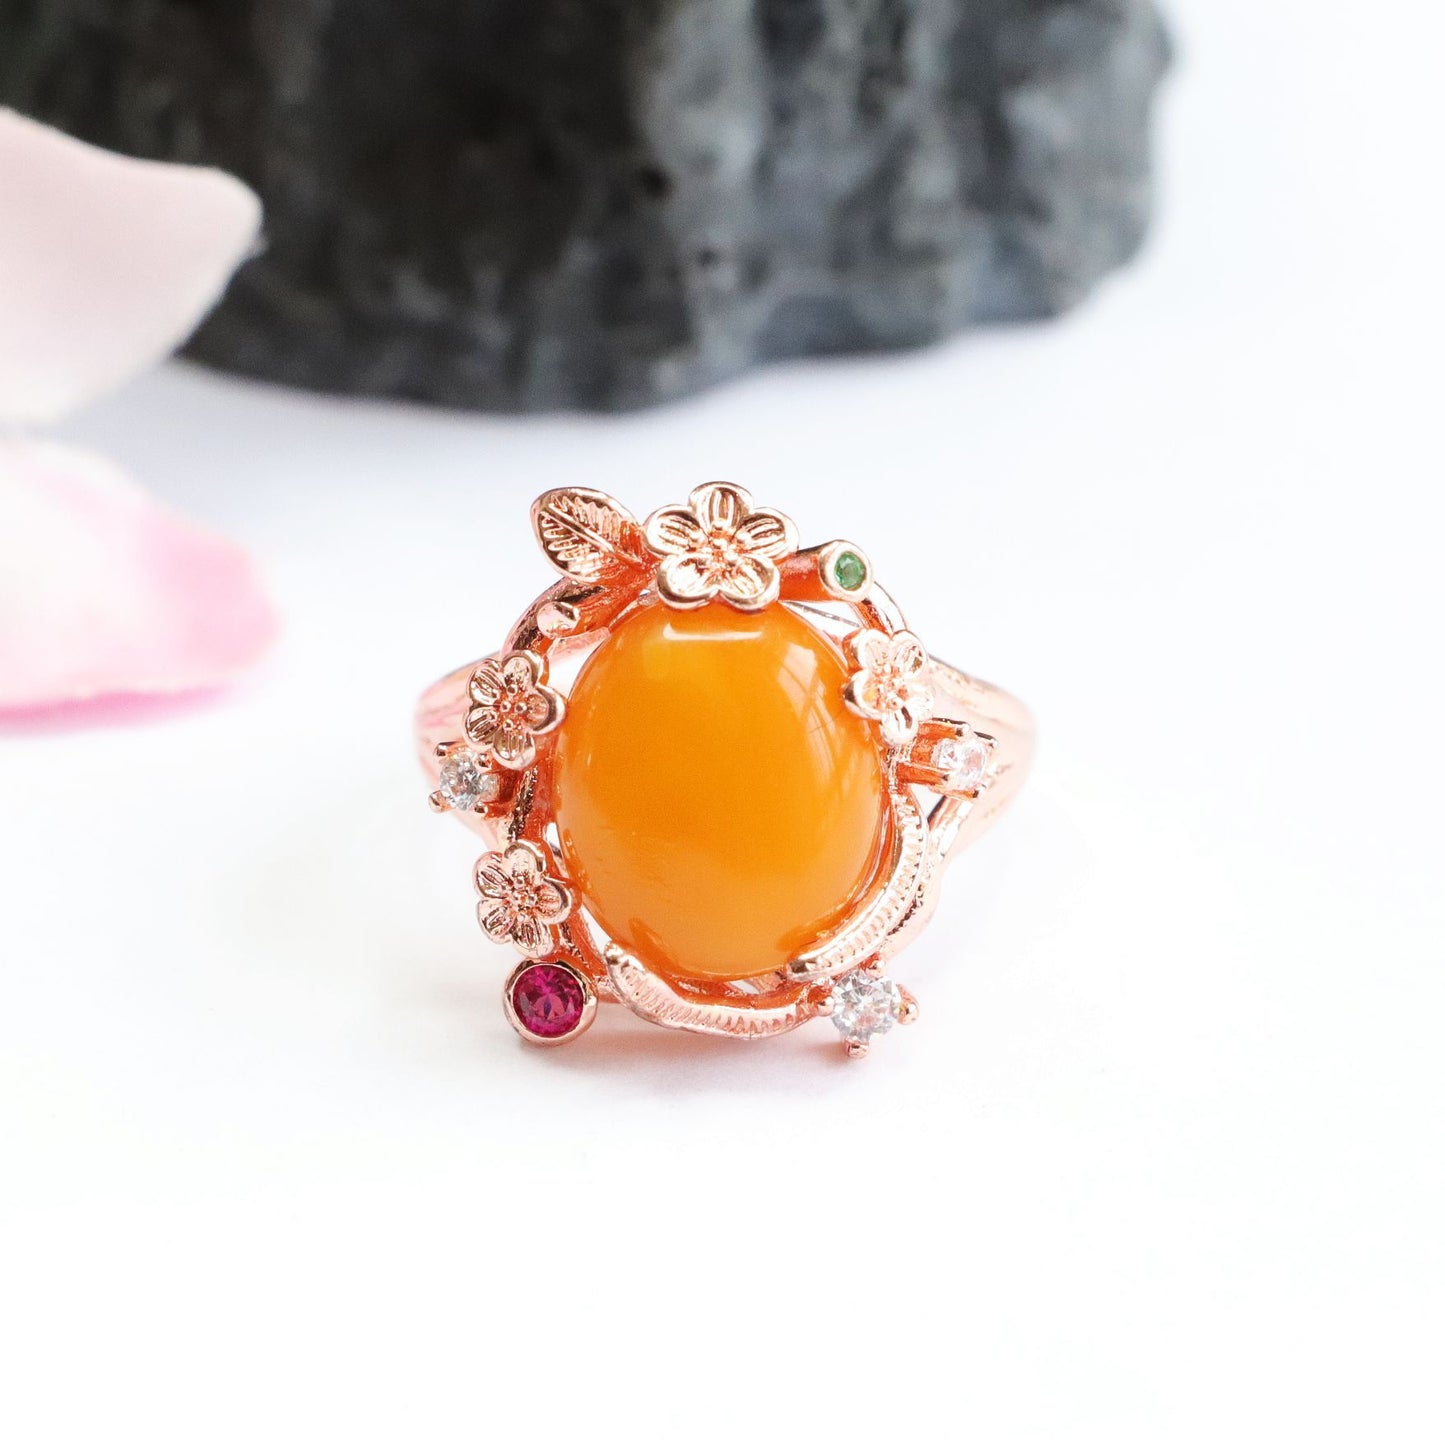 Honey Amber Ring with Zircon Accents